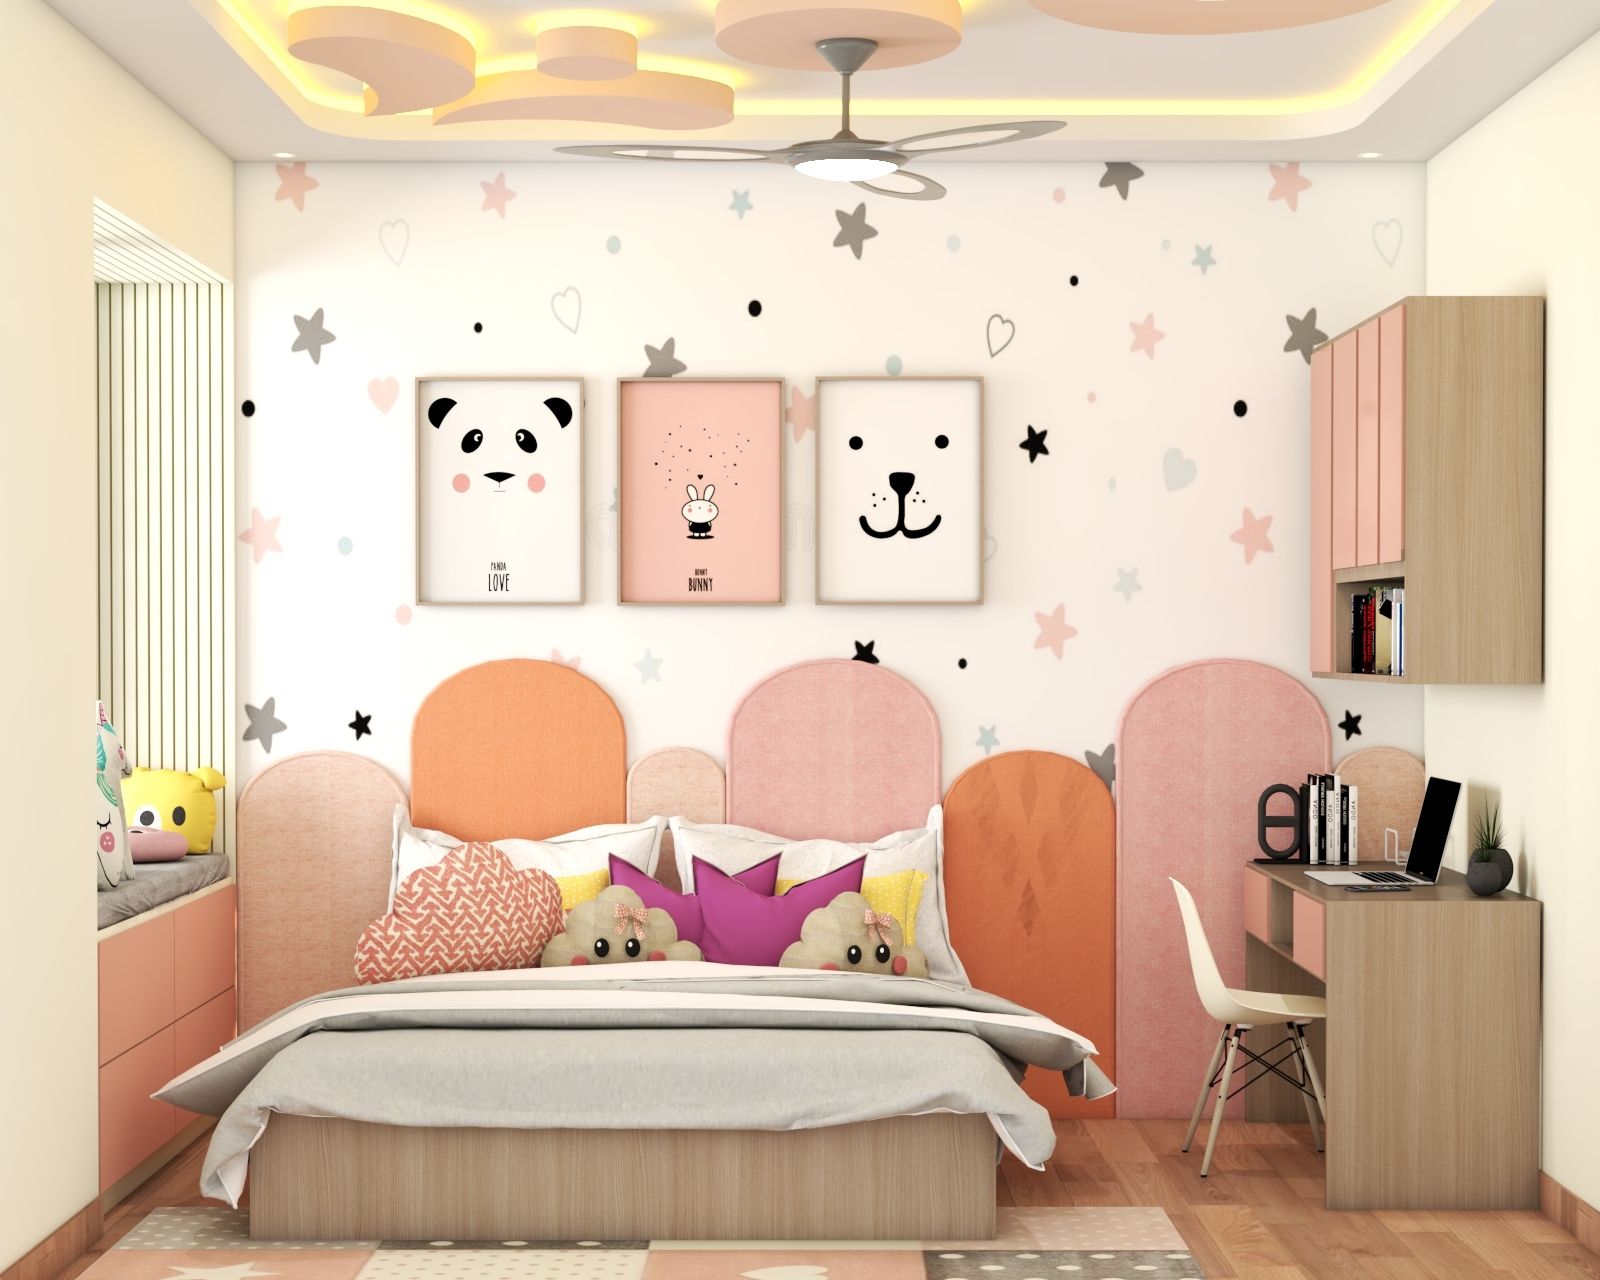 Contemporary Kids Room Design With An Upholstered Bed And Overhead Cove Lighting